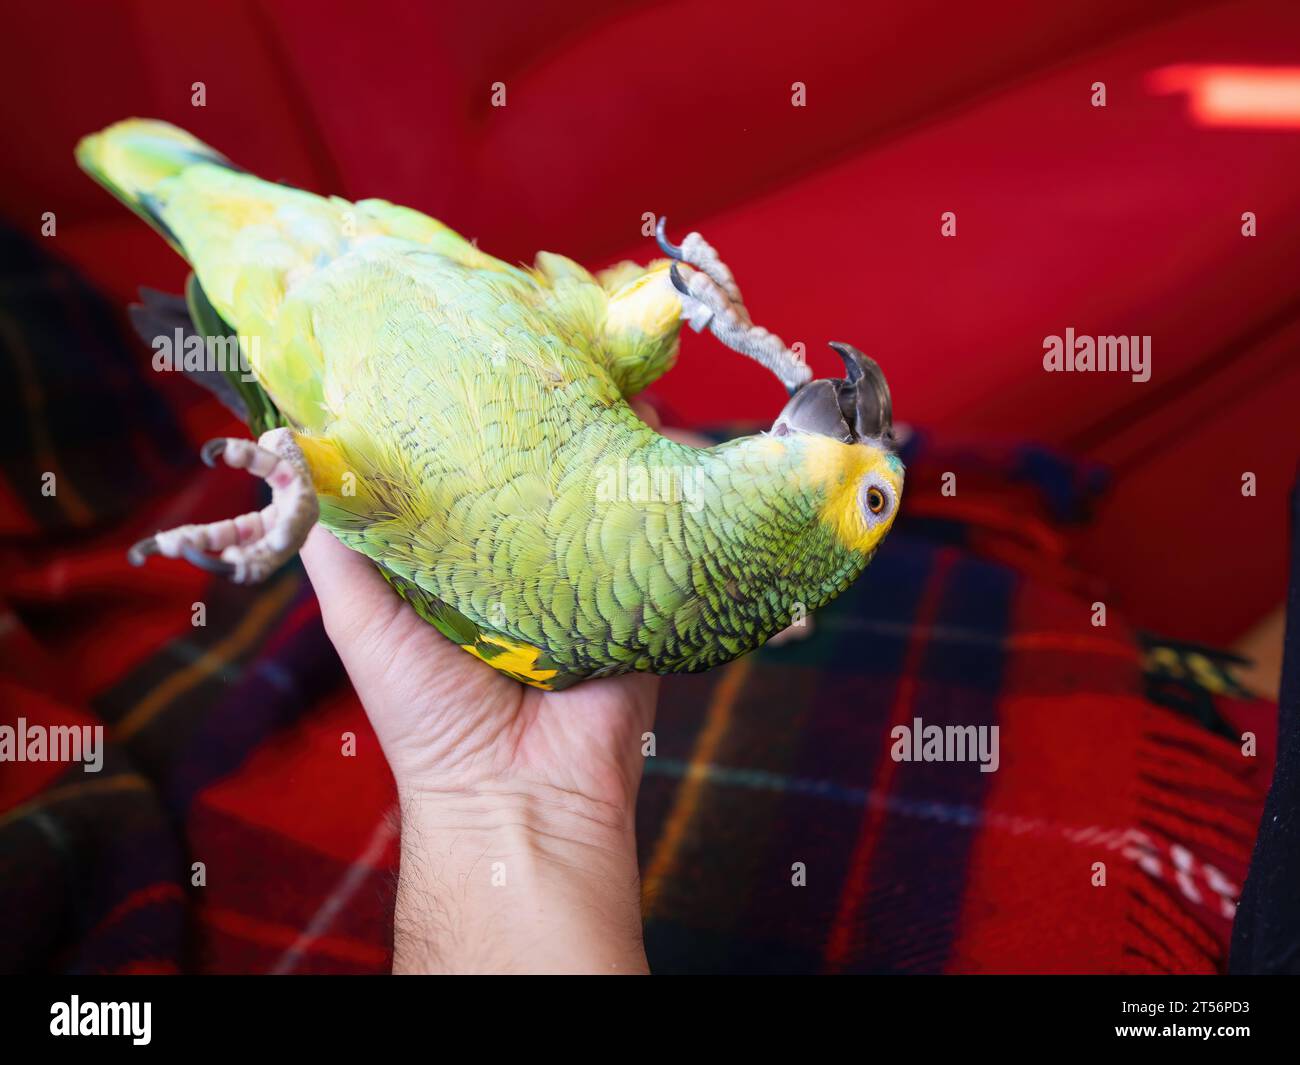 Turquoise-fronted amazon parrot (Amazona aestiva) enjoys free movement around the apartment. Cute green friendly pet bird lying in hand of its owner. Stock Photo